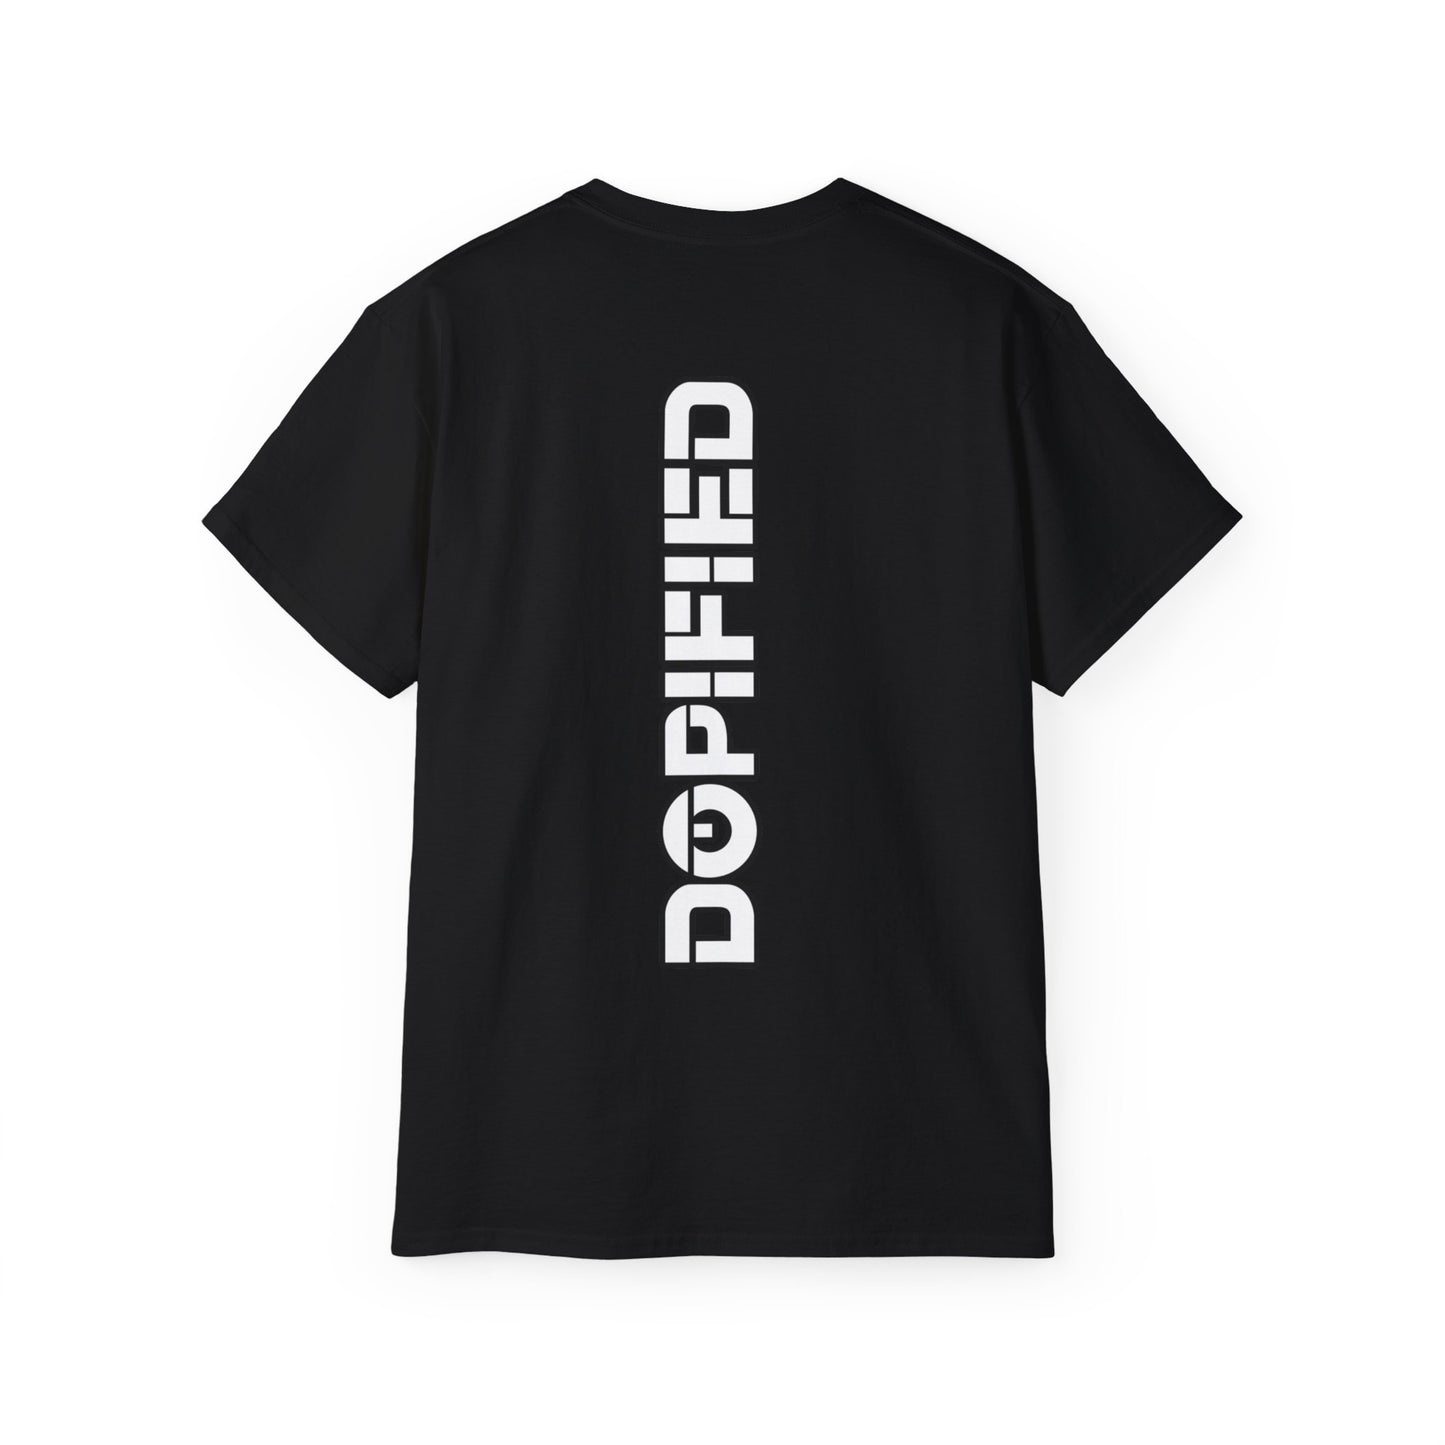 God Only "DOPiFiED" Unisex Ultra Cotton Tee